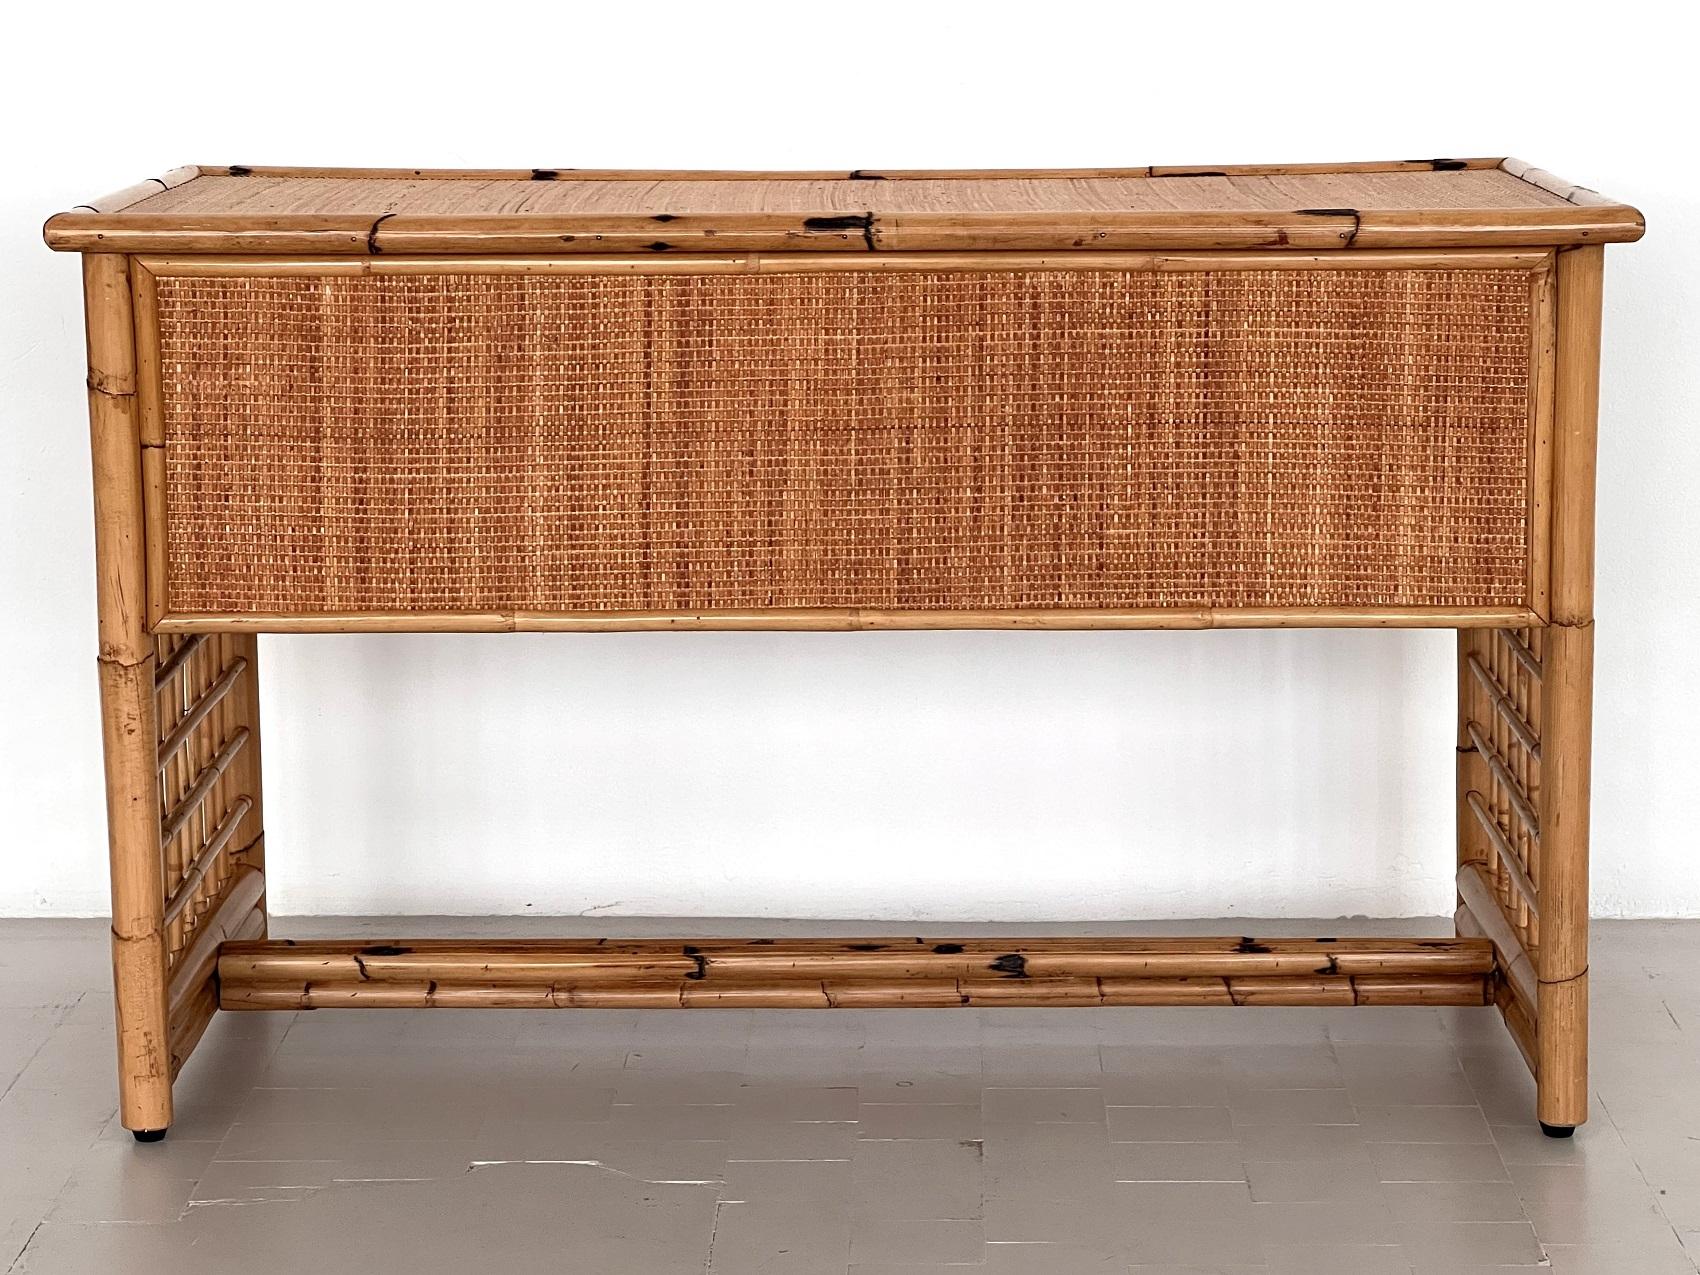 Italian Midcentury Bamboo and Rattan Desk or Vanity with two Drawers, 1970s For Sale 1